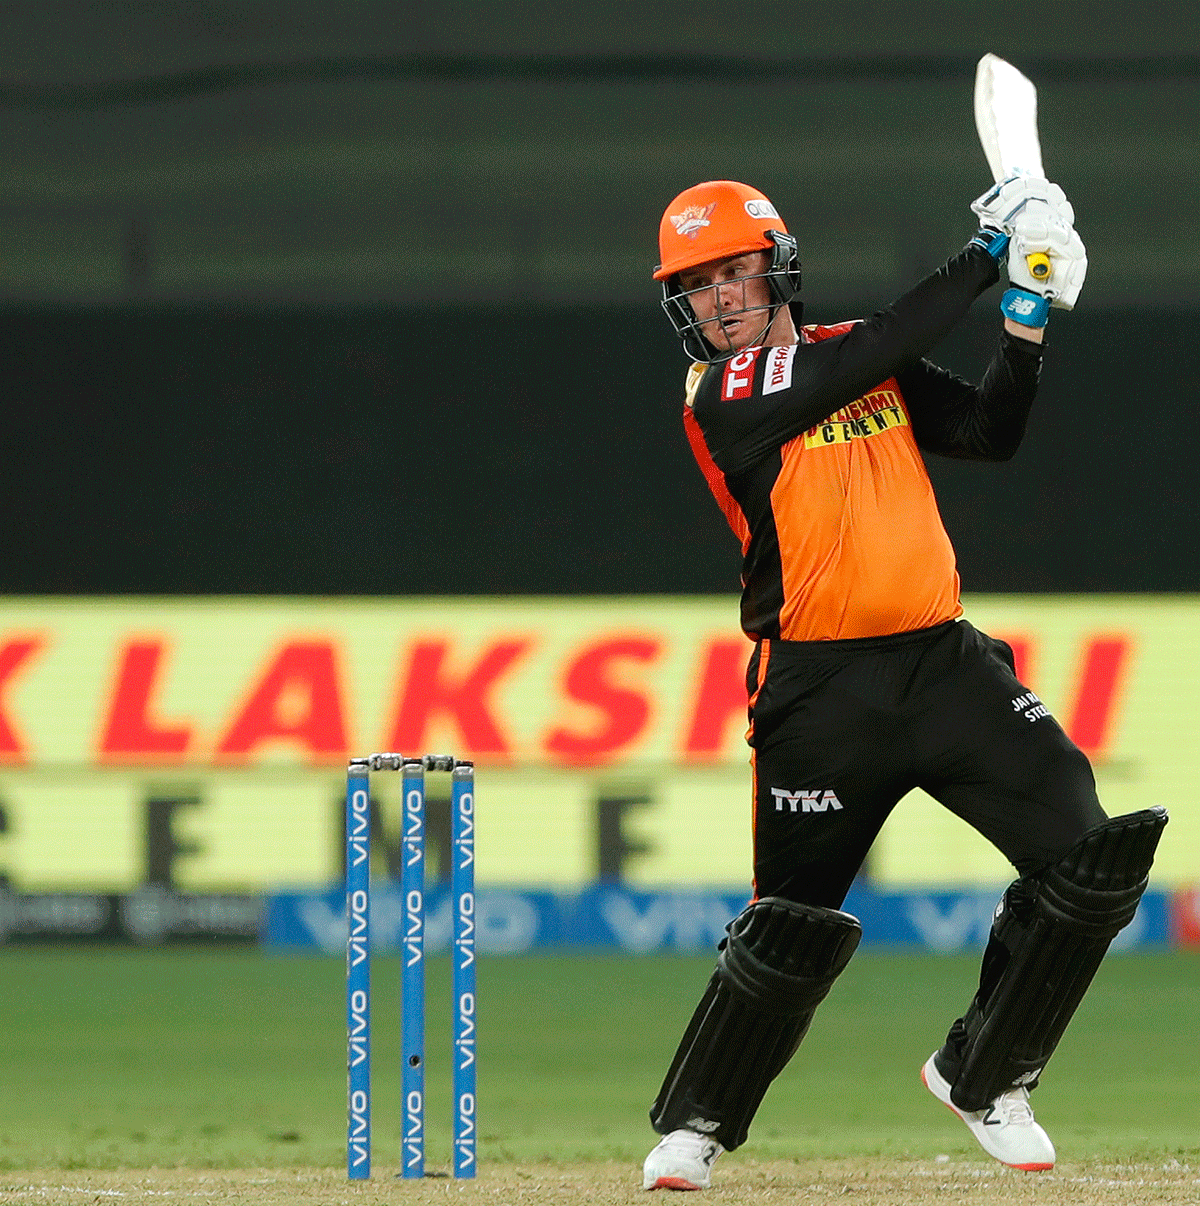 Debutant Jason Roy scored a quickfire 60 off 42 balls to set the ball rolling for the SunRisers